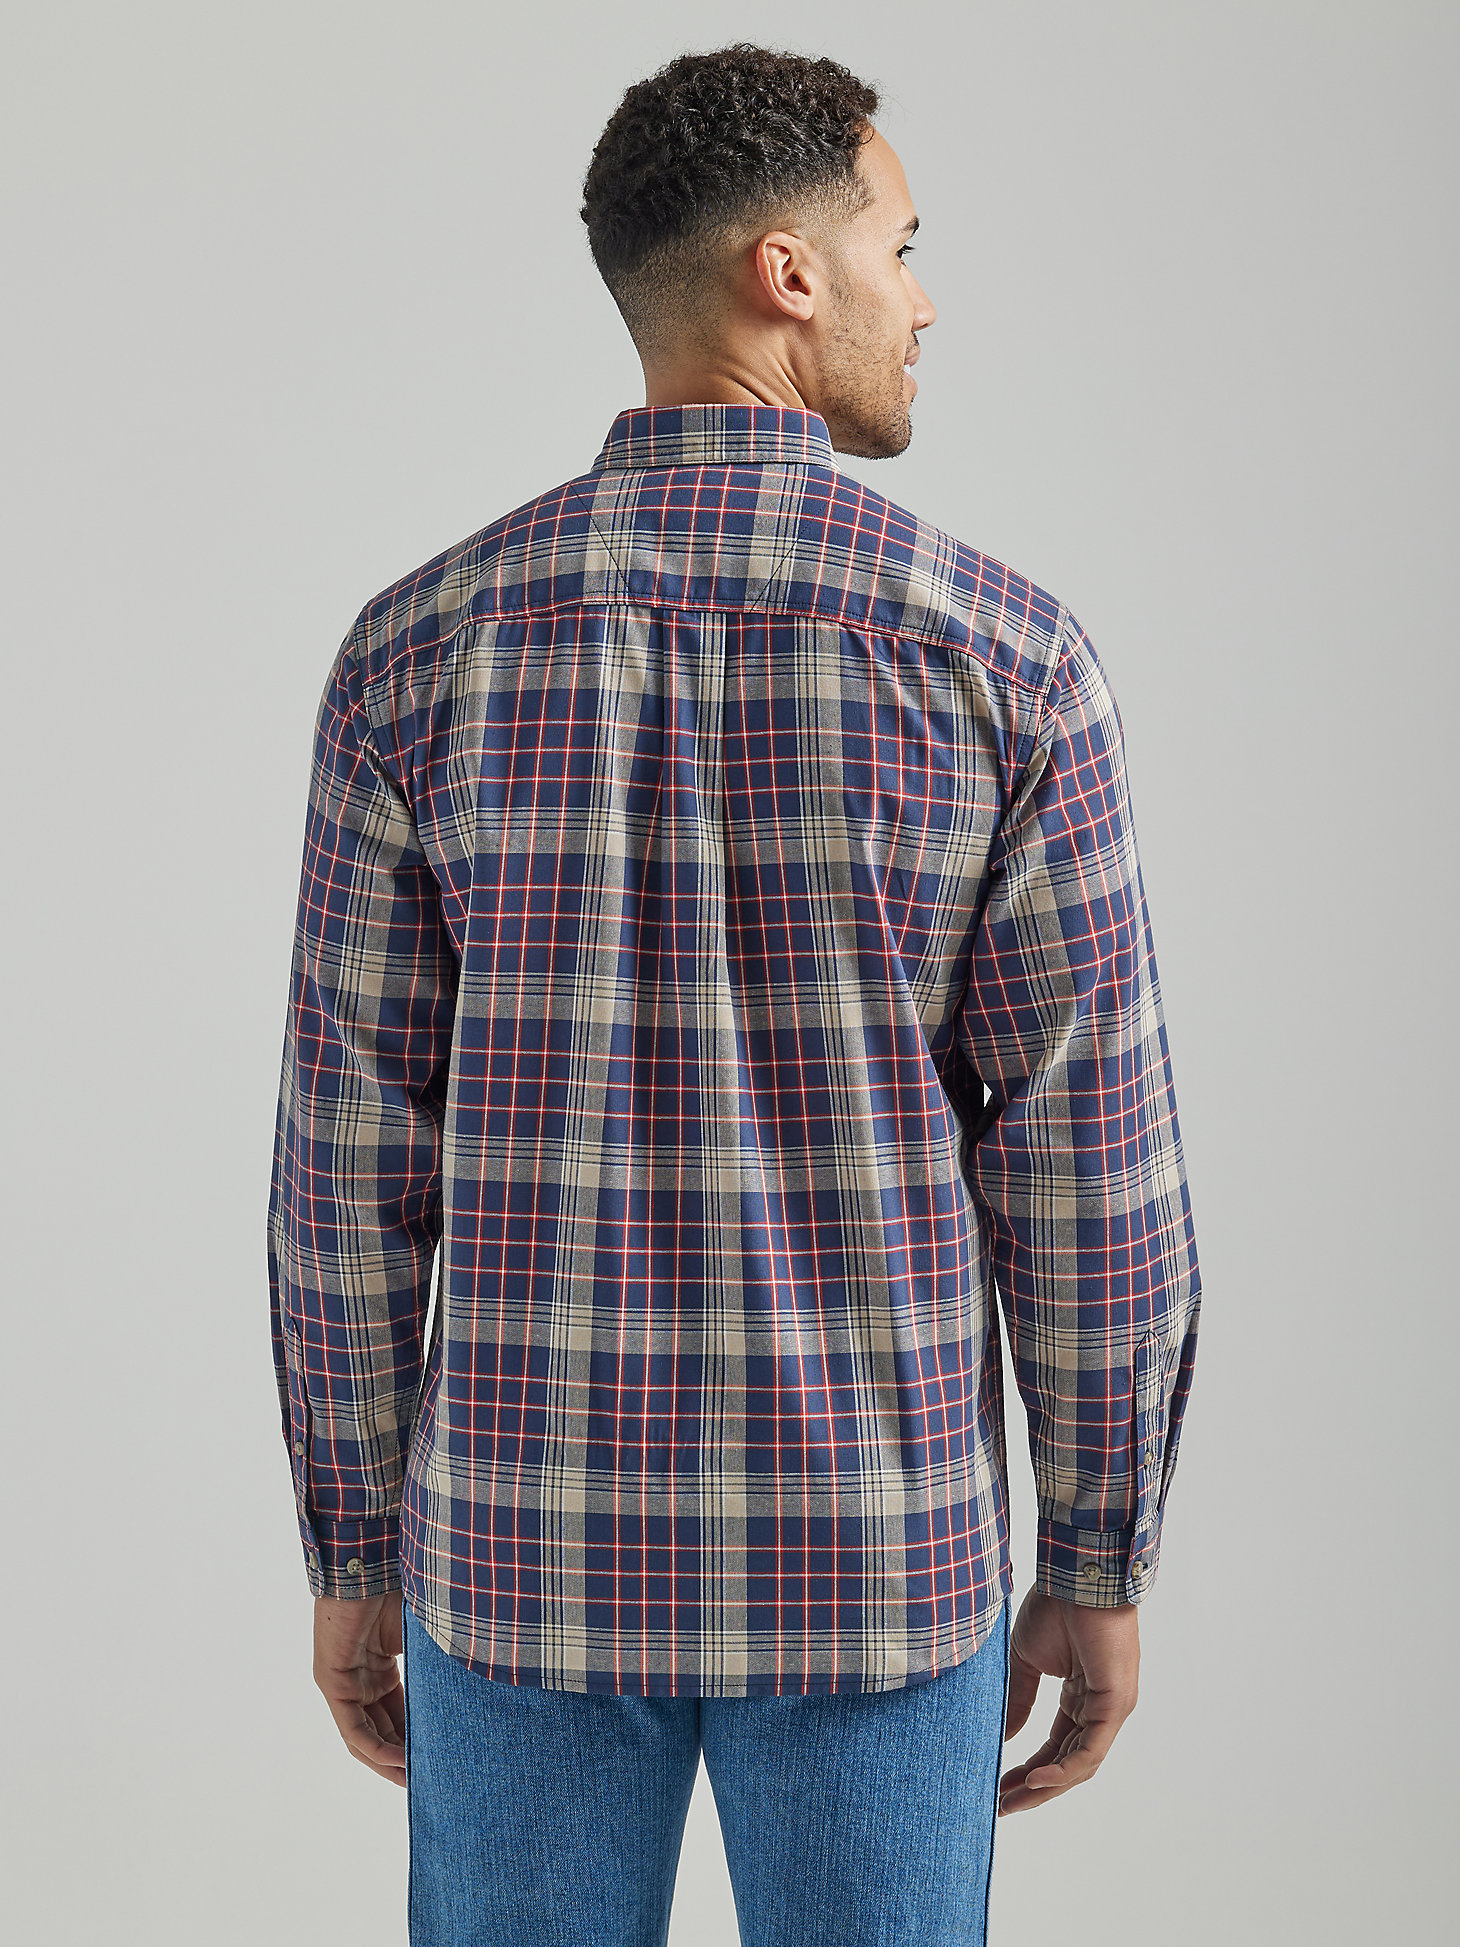 Wrangler Rugged Wear® Long Sleeve Easy Care Plaid Button-Down Shirt in Dallas alternative view 1